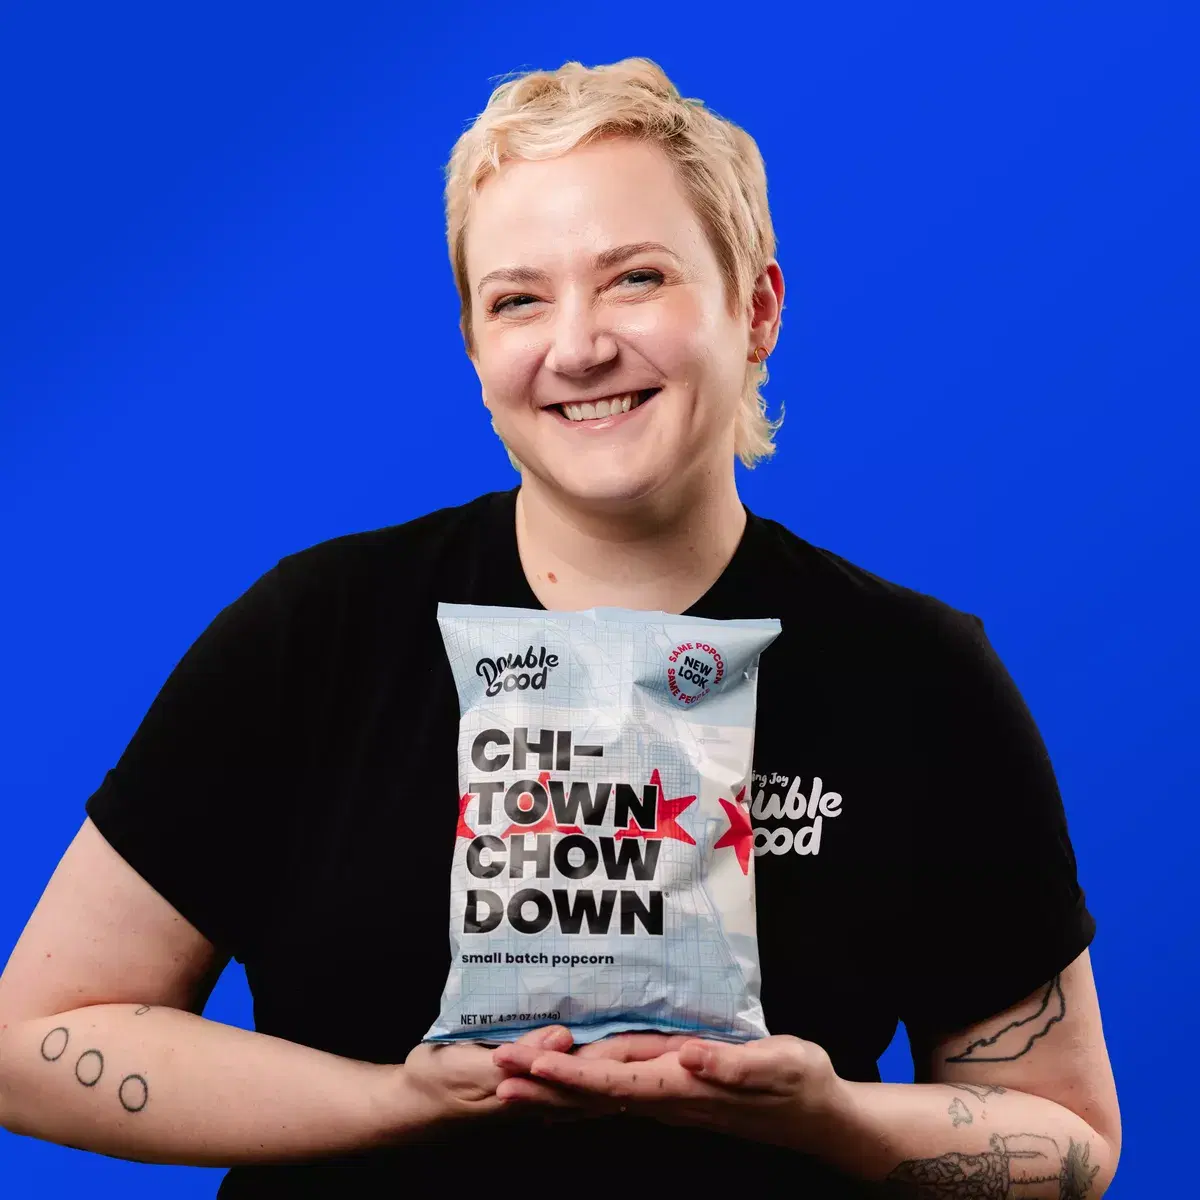 A picture of Amy holding a bag of popcorn and smiling.